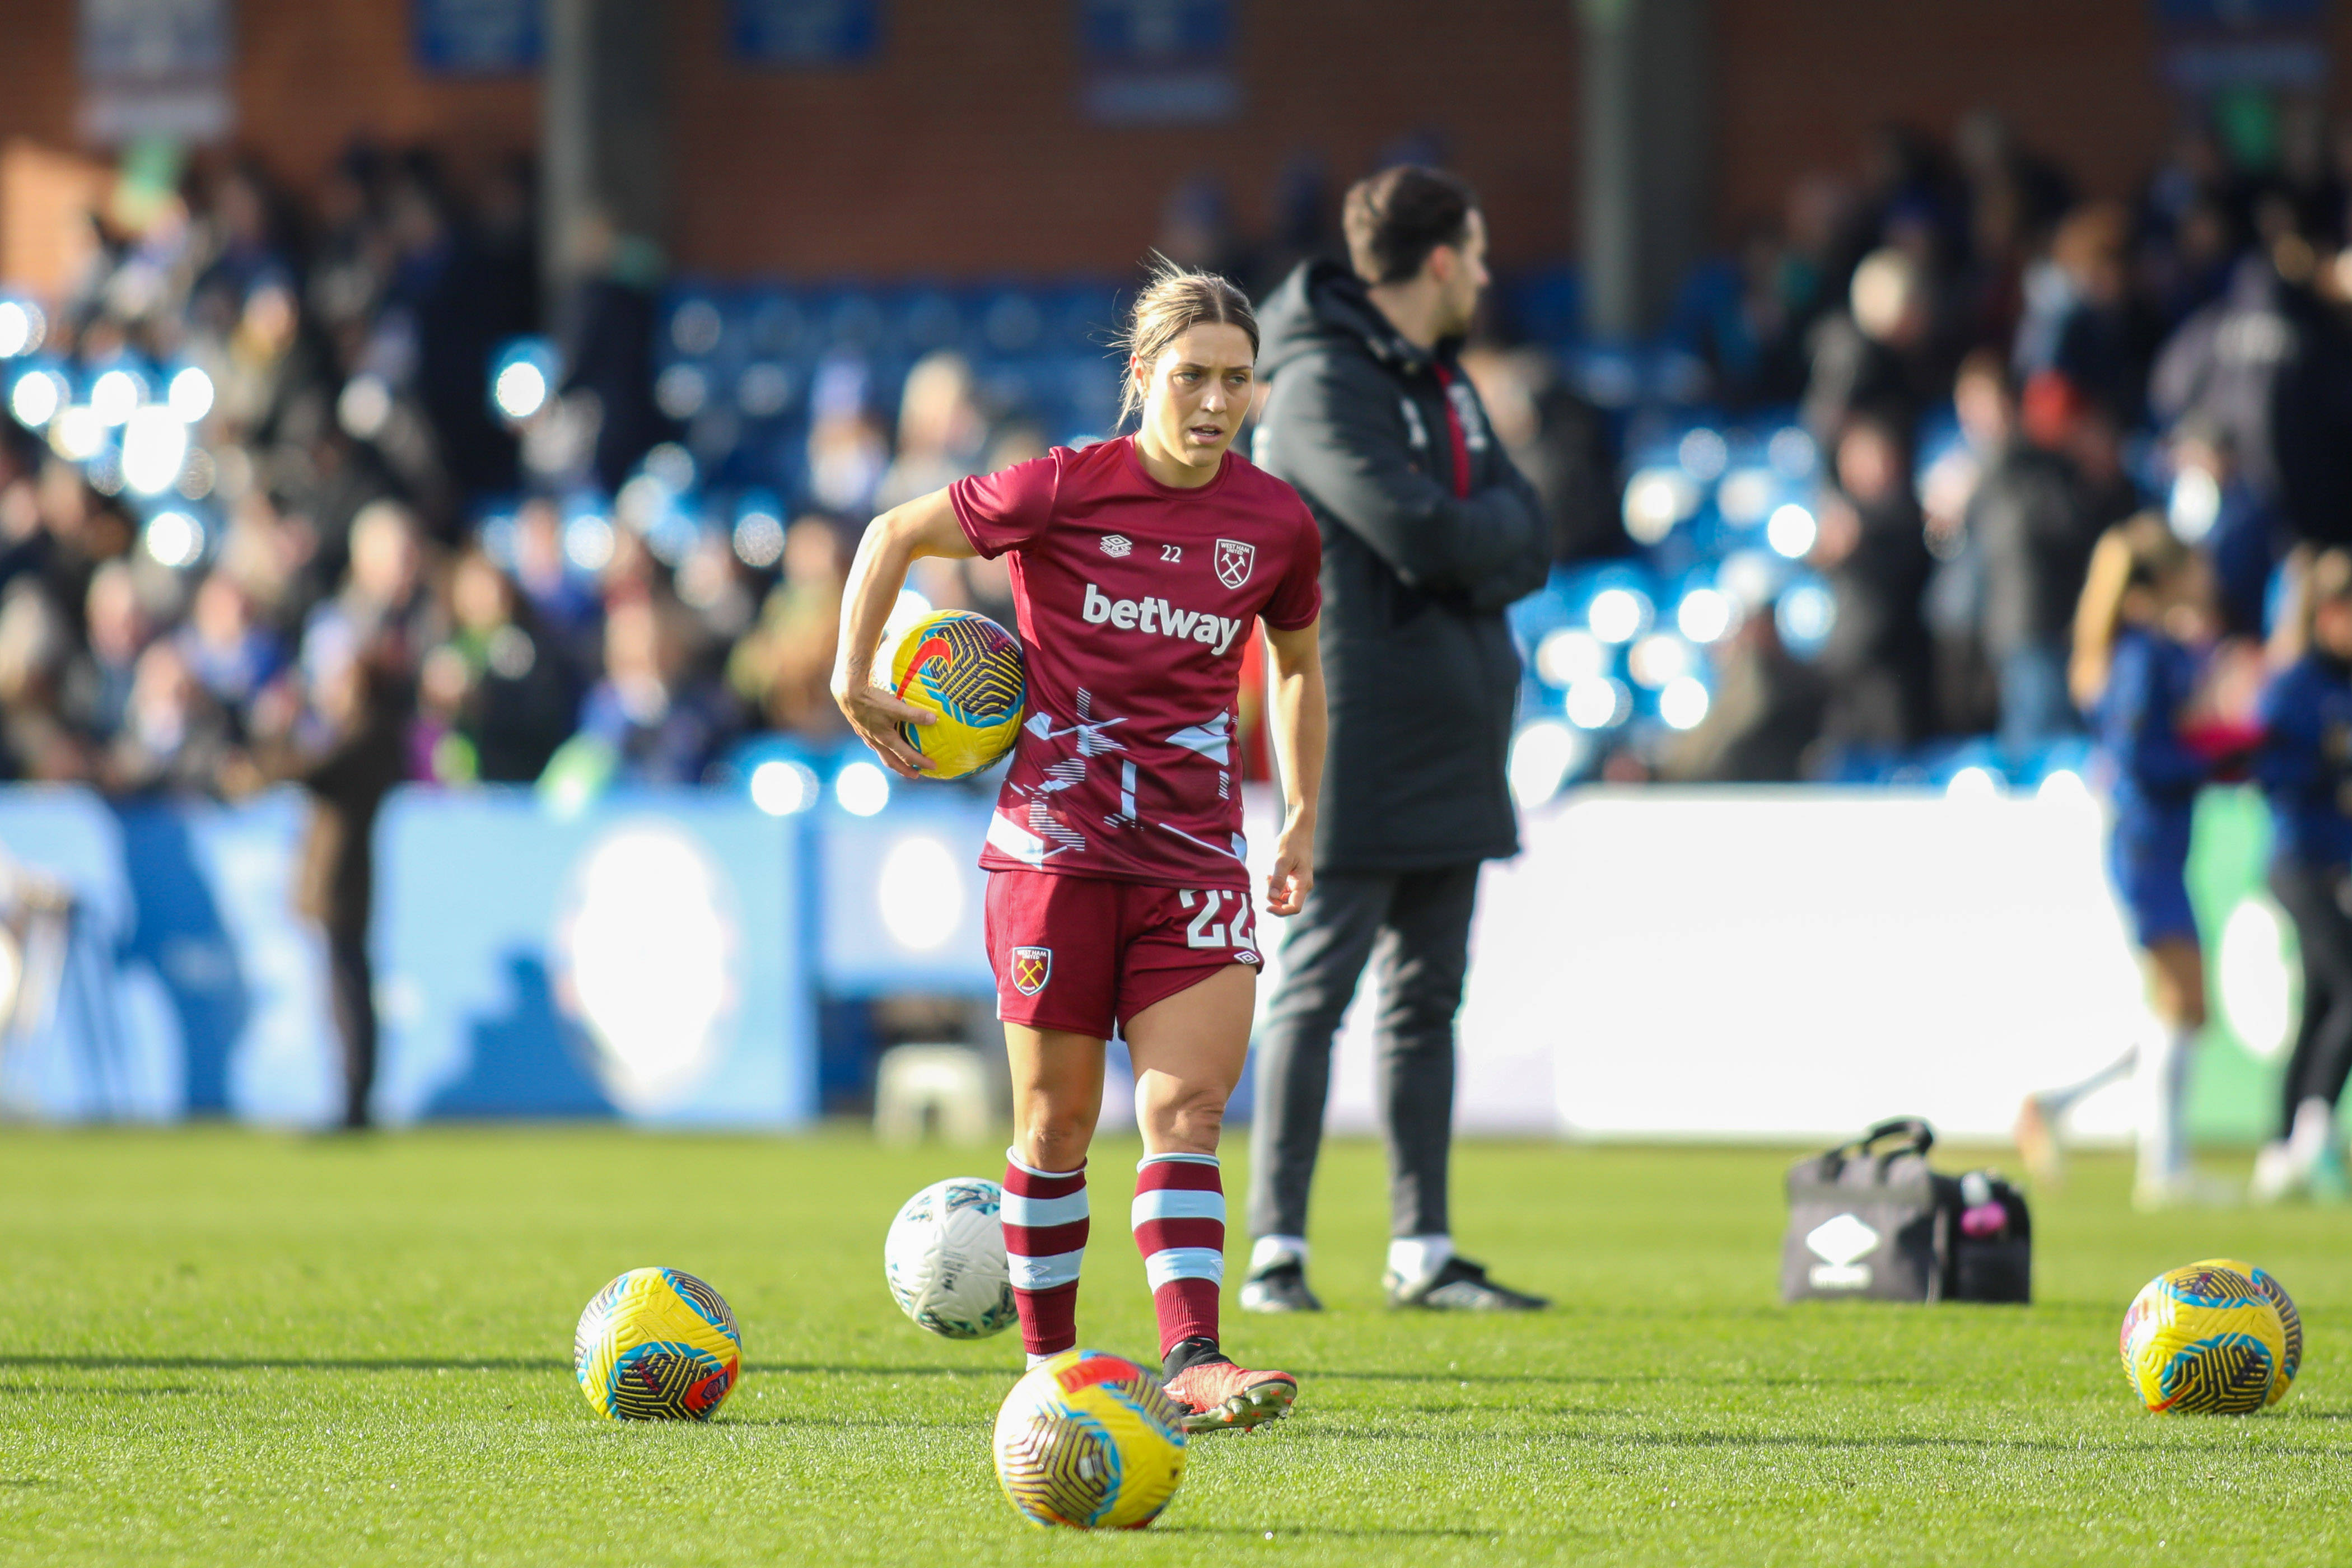 Katrina-Lee Gorry (22 West Ham) warming up during the Womens FA Cup match between Chelsea and West Ham at Kingsmeadow in London, England (Alexander Canillas / SPP)